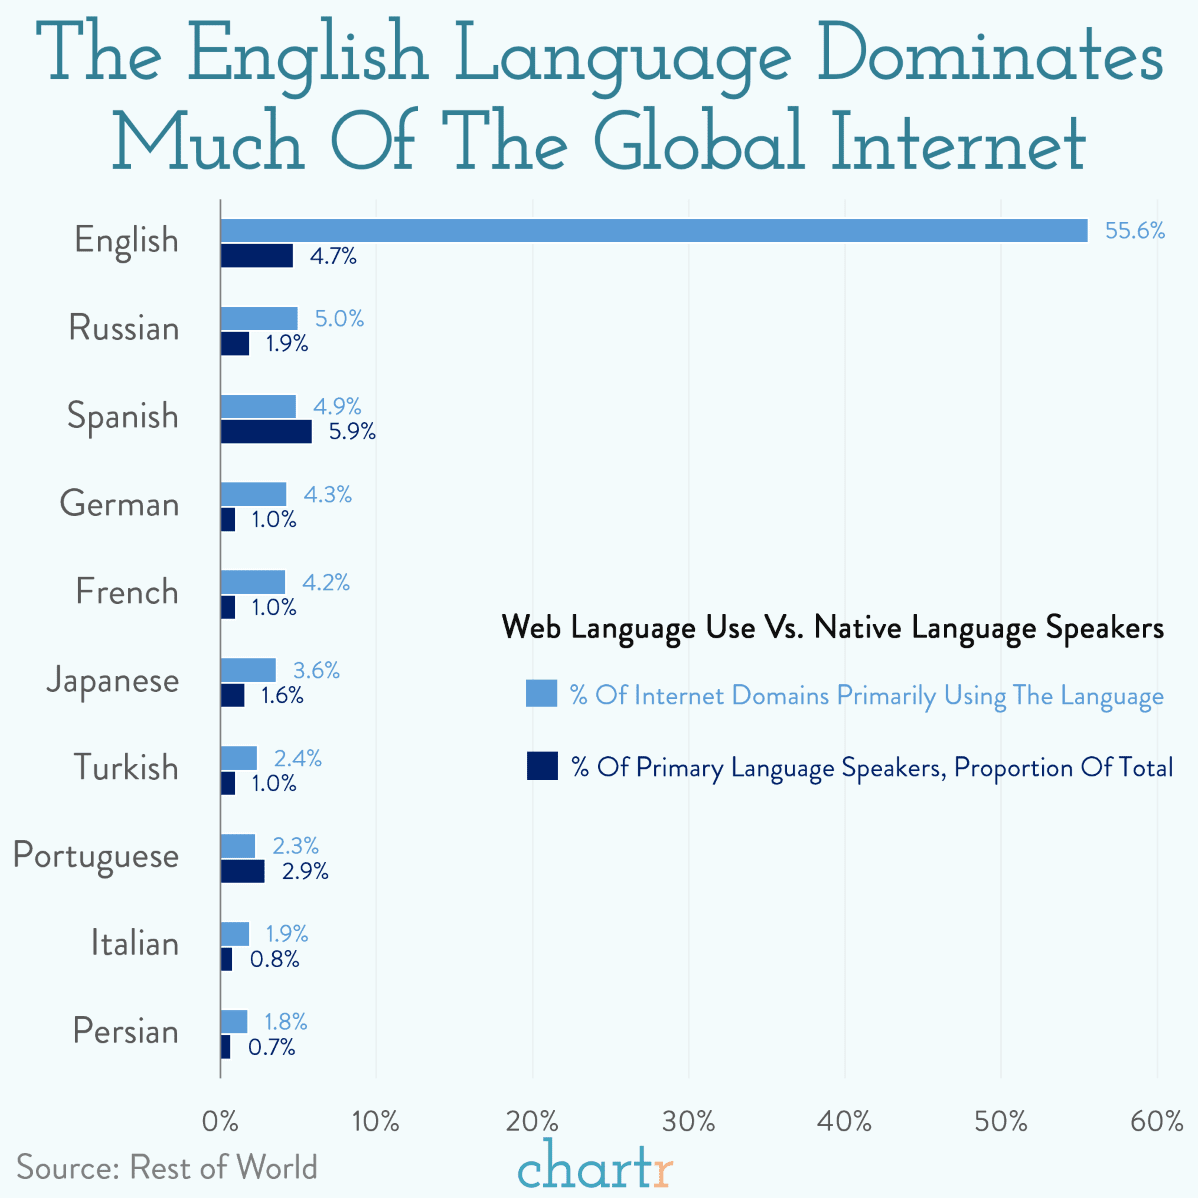 Chart titled The English Language Dominates Much of the Global Internet. The bar sets for each language compare web language use versus native language speakers. For example, in the English bar set, 55.6% of internet domains primarily use English vs 4.7% of primary language speakers (proportion of total). 